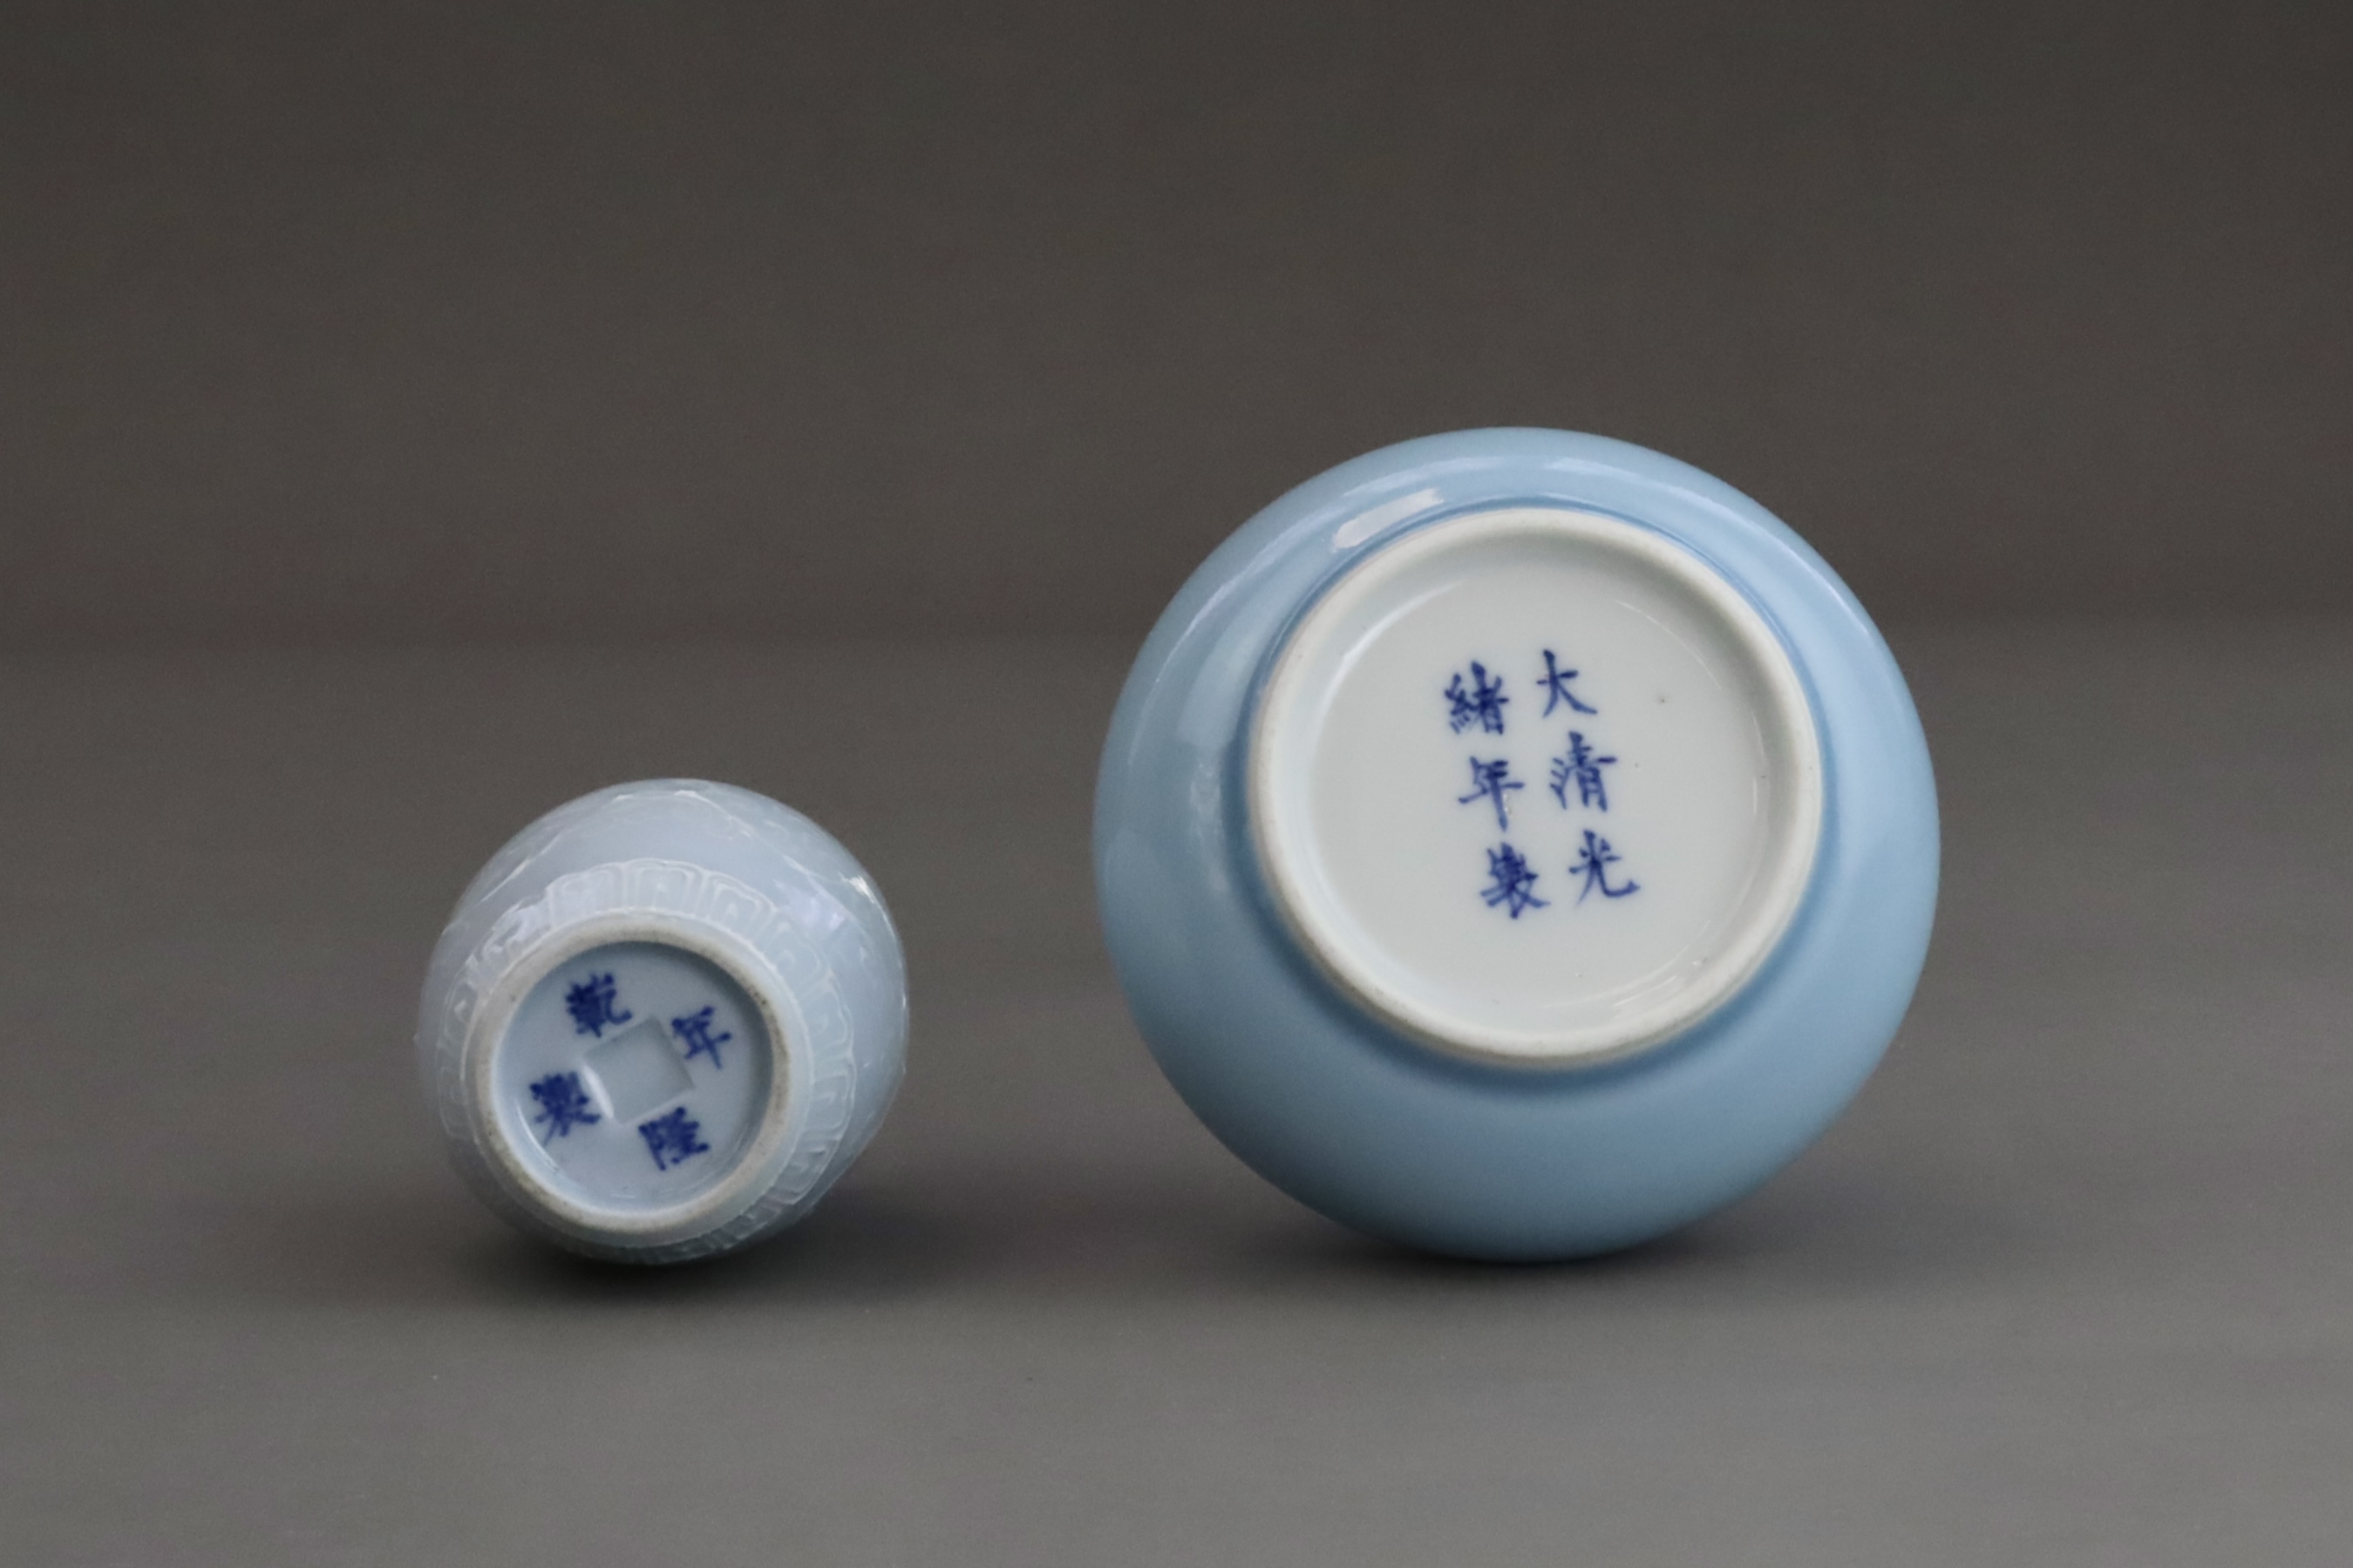  'Clair de lune': A Brushwasher, Guangxu mark and period, and a Moulded small Jar, Qing dynasty - Image 7 of 7